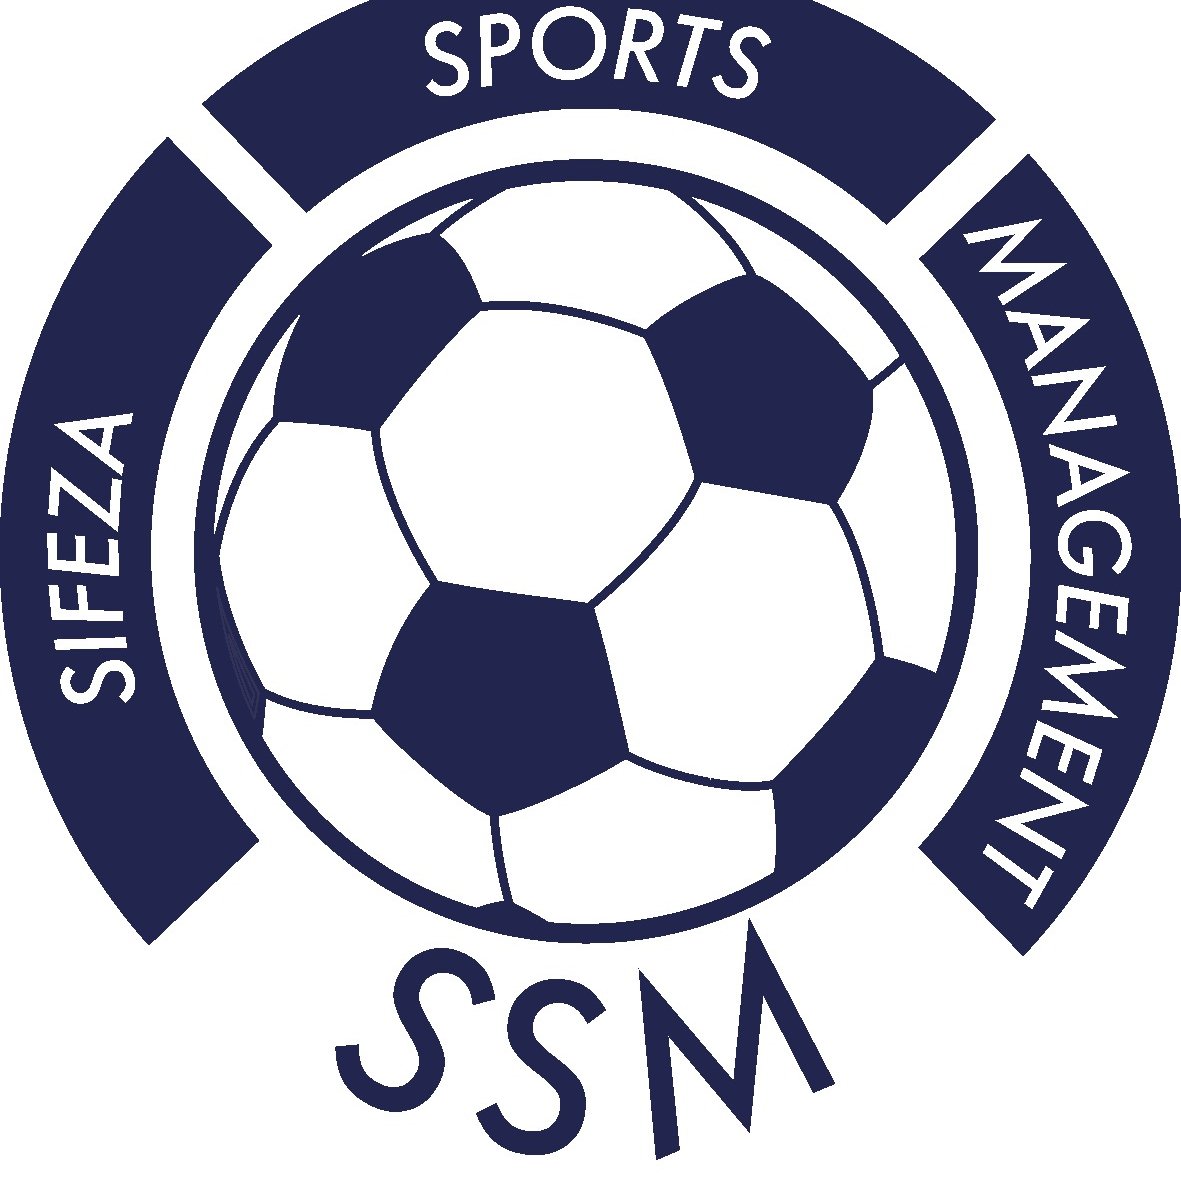 A sports consultancy operating predominantly in Africa. Providing intermediary and scouting services for players, technical staff, and clubs.